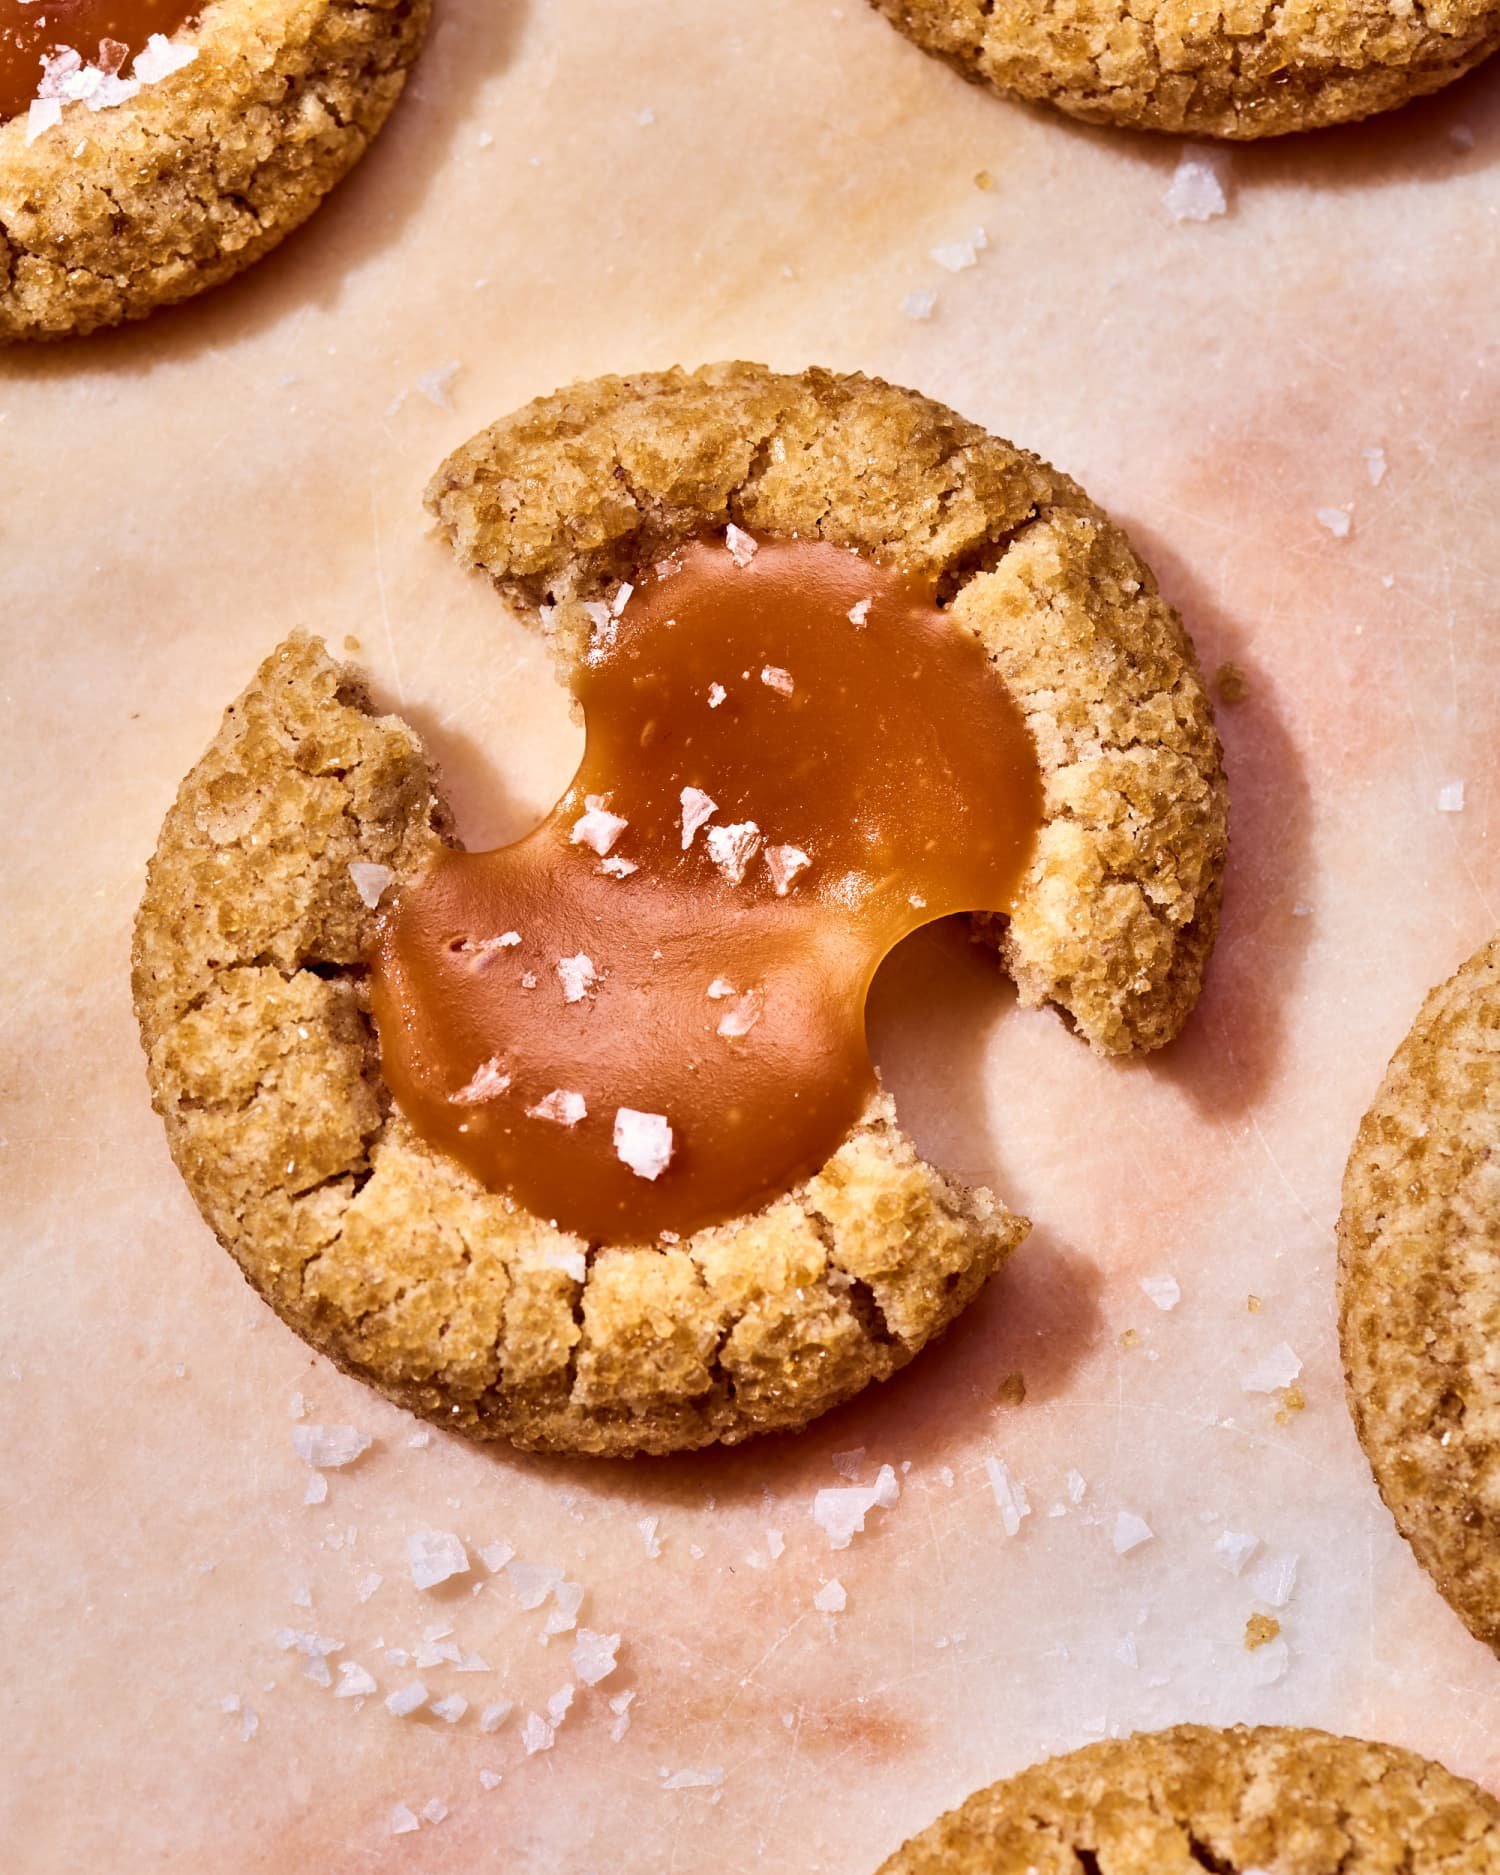 Salted Caramel Thumbprints Have Been the Ultimate Sweet & Salty Cookie for More than a Decade